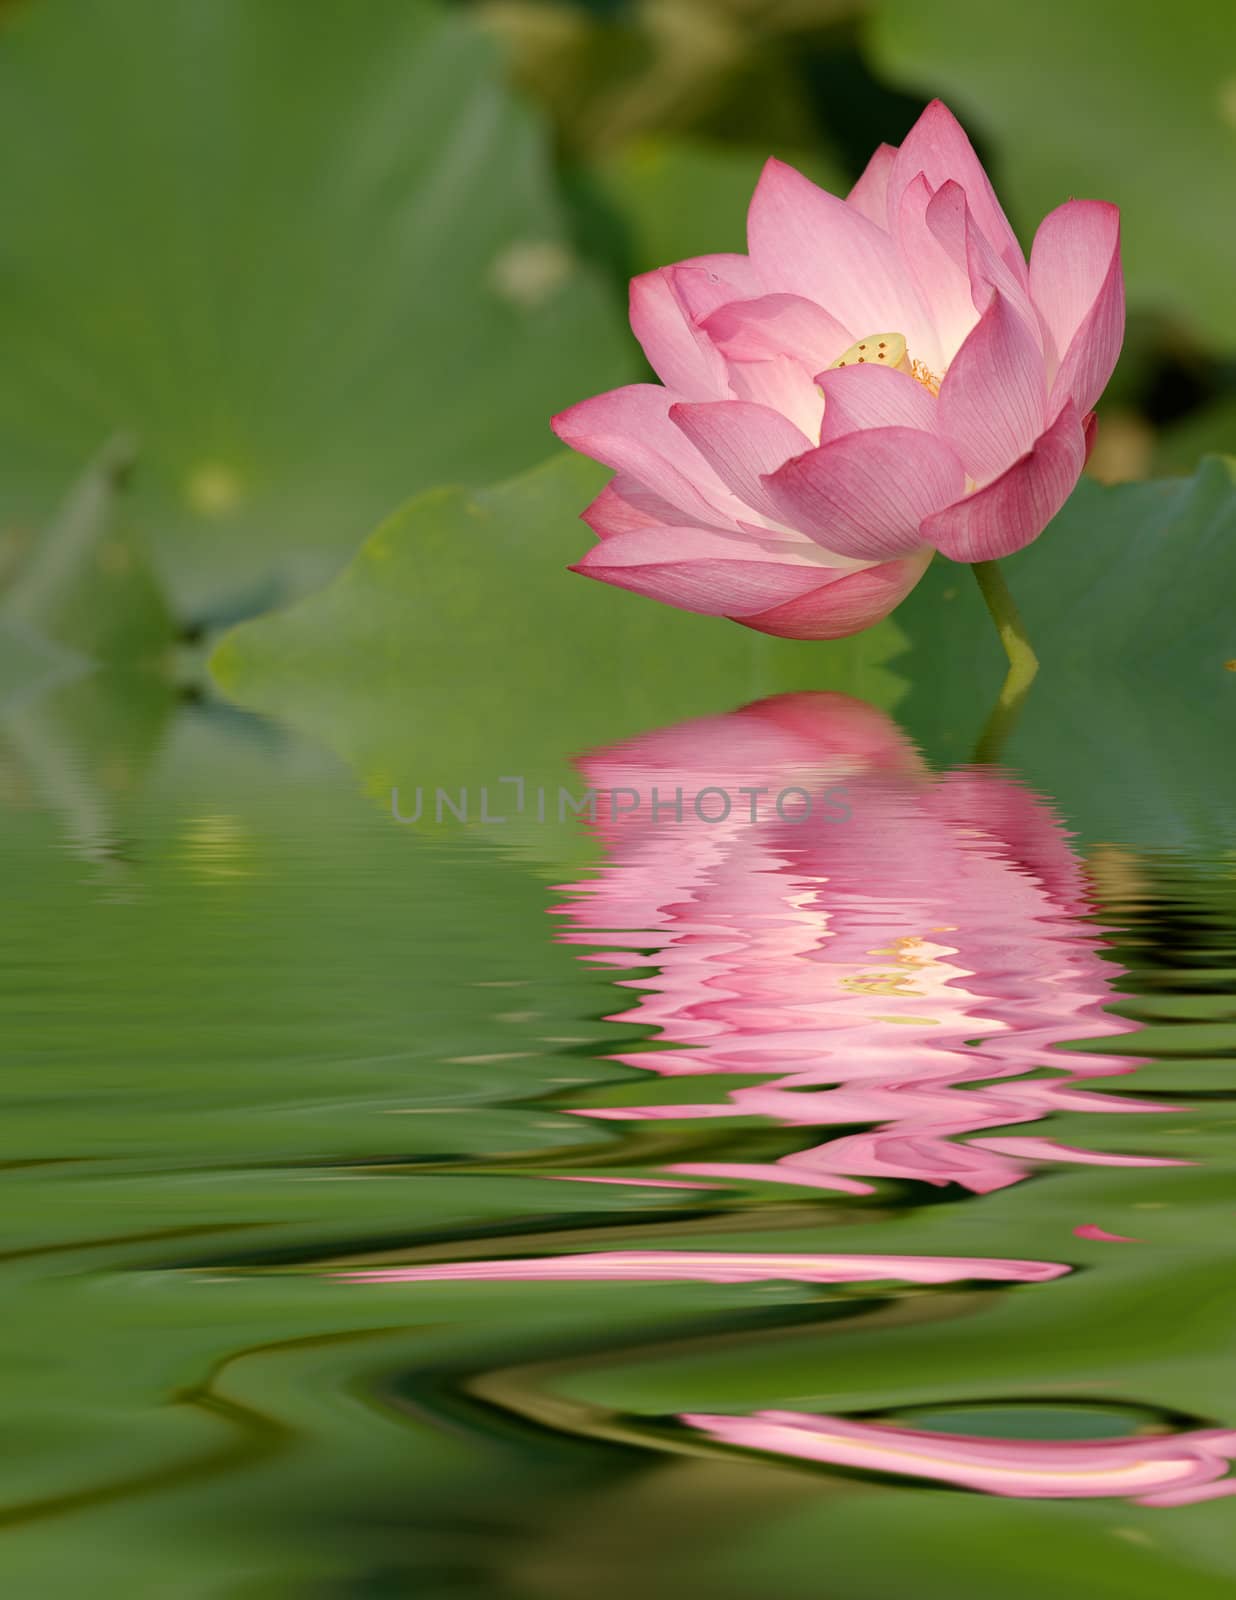 It is a beautiful lotus with water reflection.